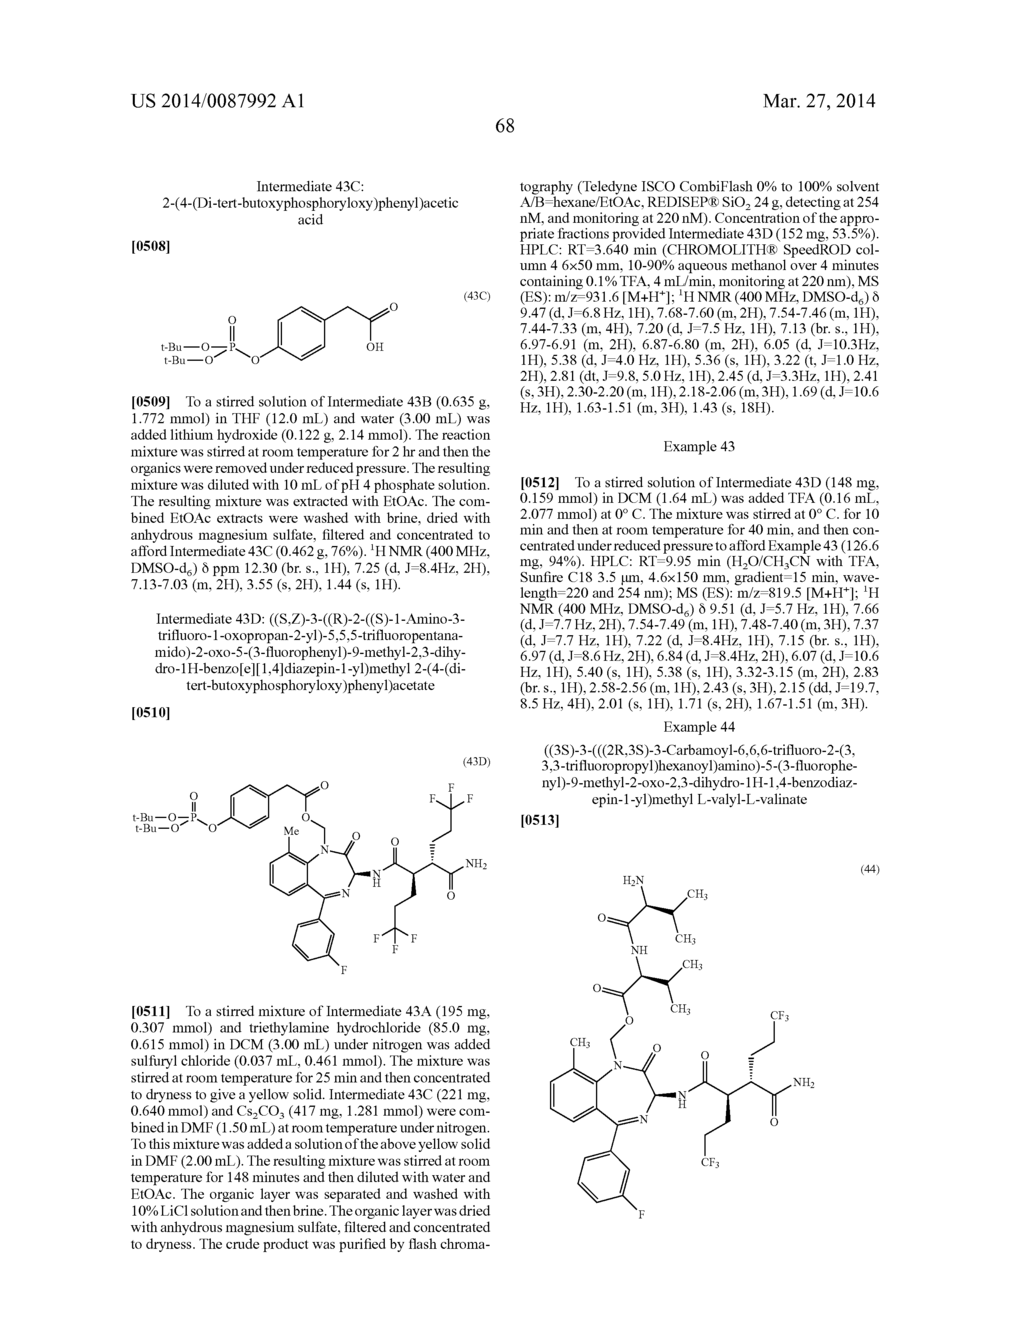 BIS(FLUOROALKYL)-1,4-BENZODIAZEPINONE COMPOUNDS AND PRODRUGS THEREOF - diagram, schematic, and image 75